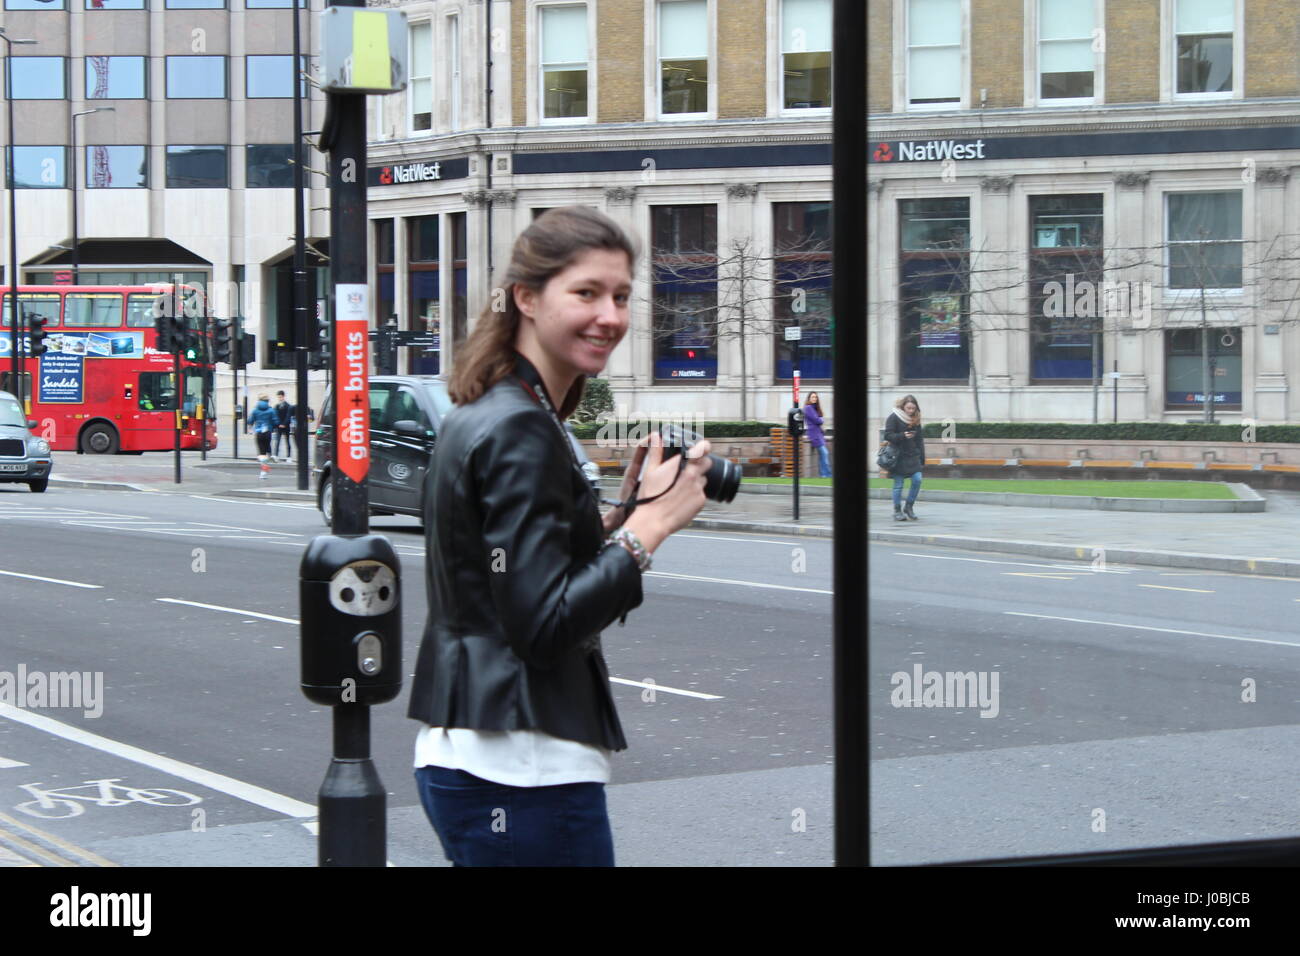 young women with camera in London street taking photos Stock Photo